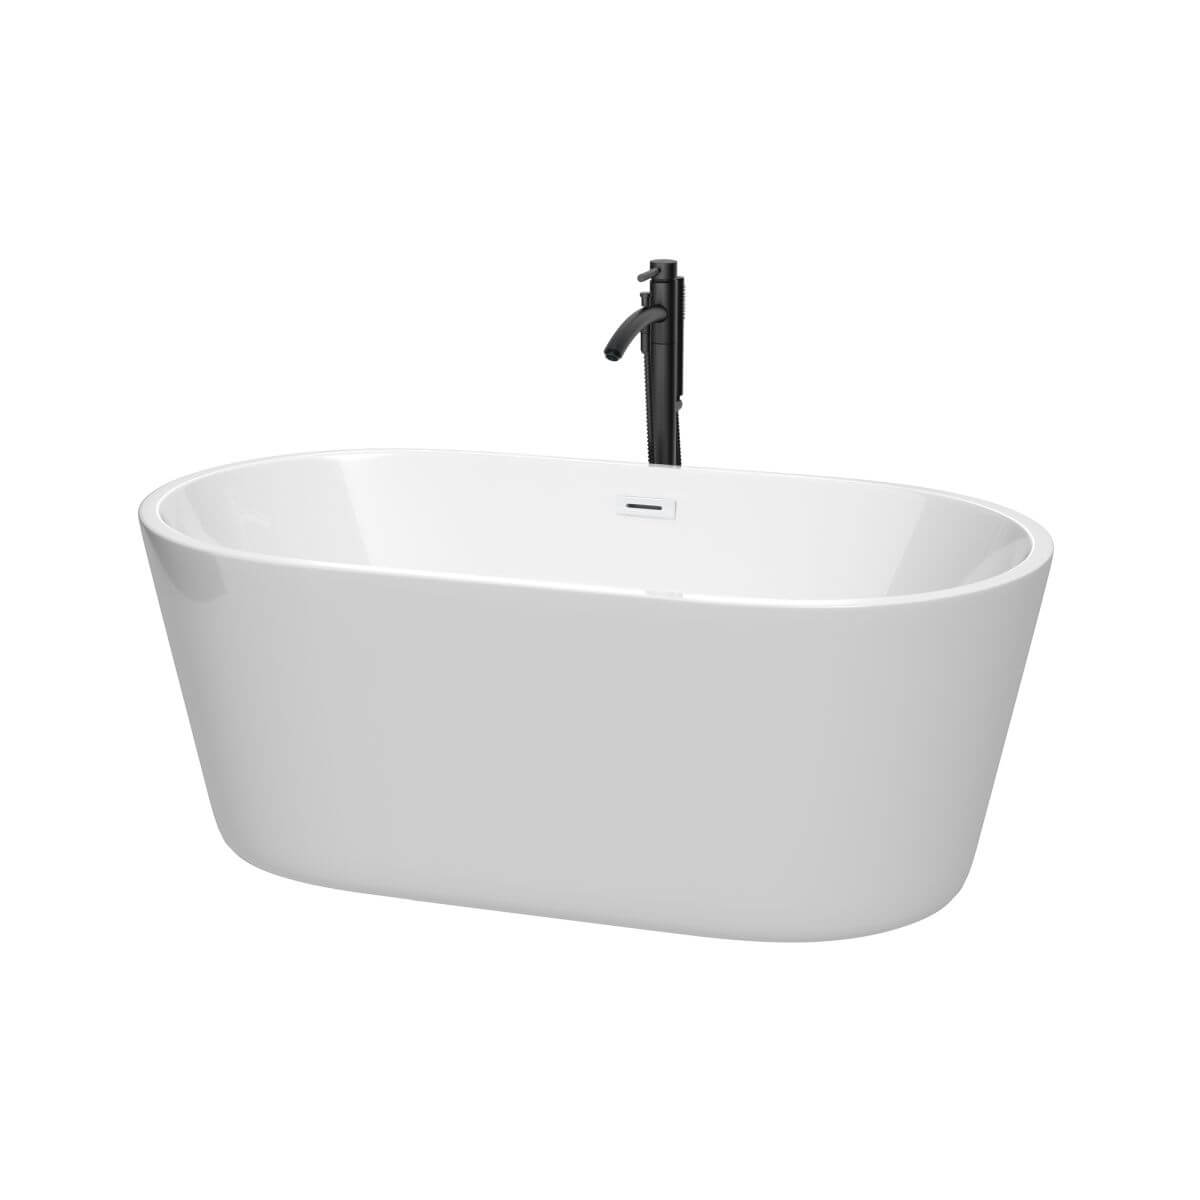 Wyndham Collection Carissa 60 inch Freestanding Bathtub in White with Shiny White Trim and Floor Mounted Faucet in Matte Black - WCOBT101260SWATPBK